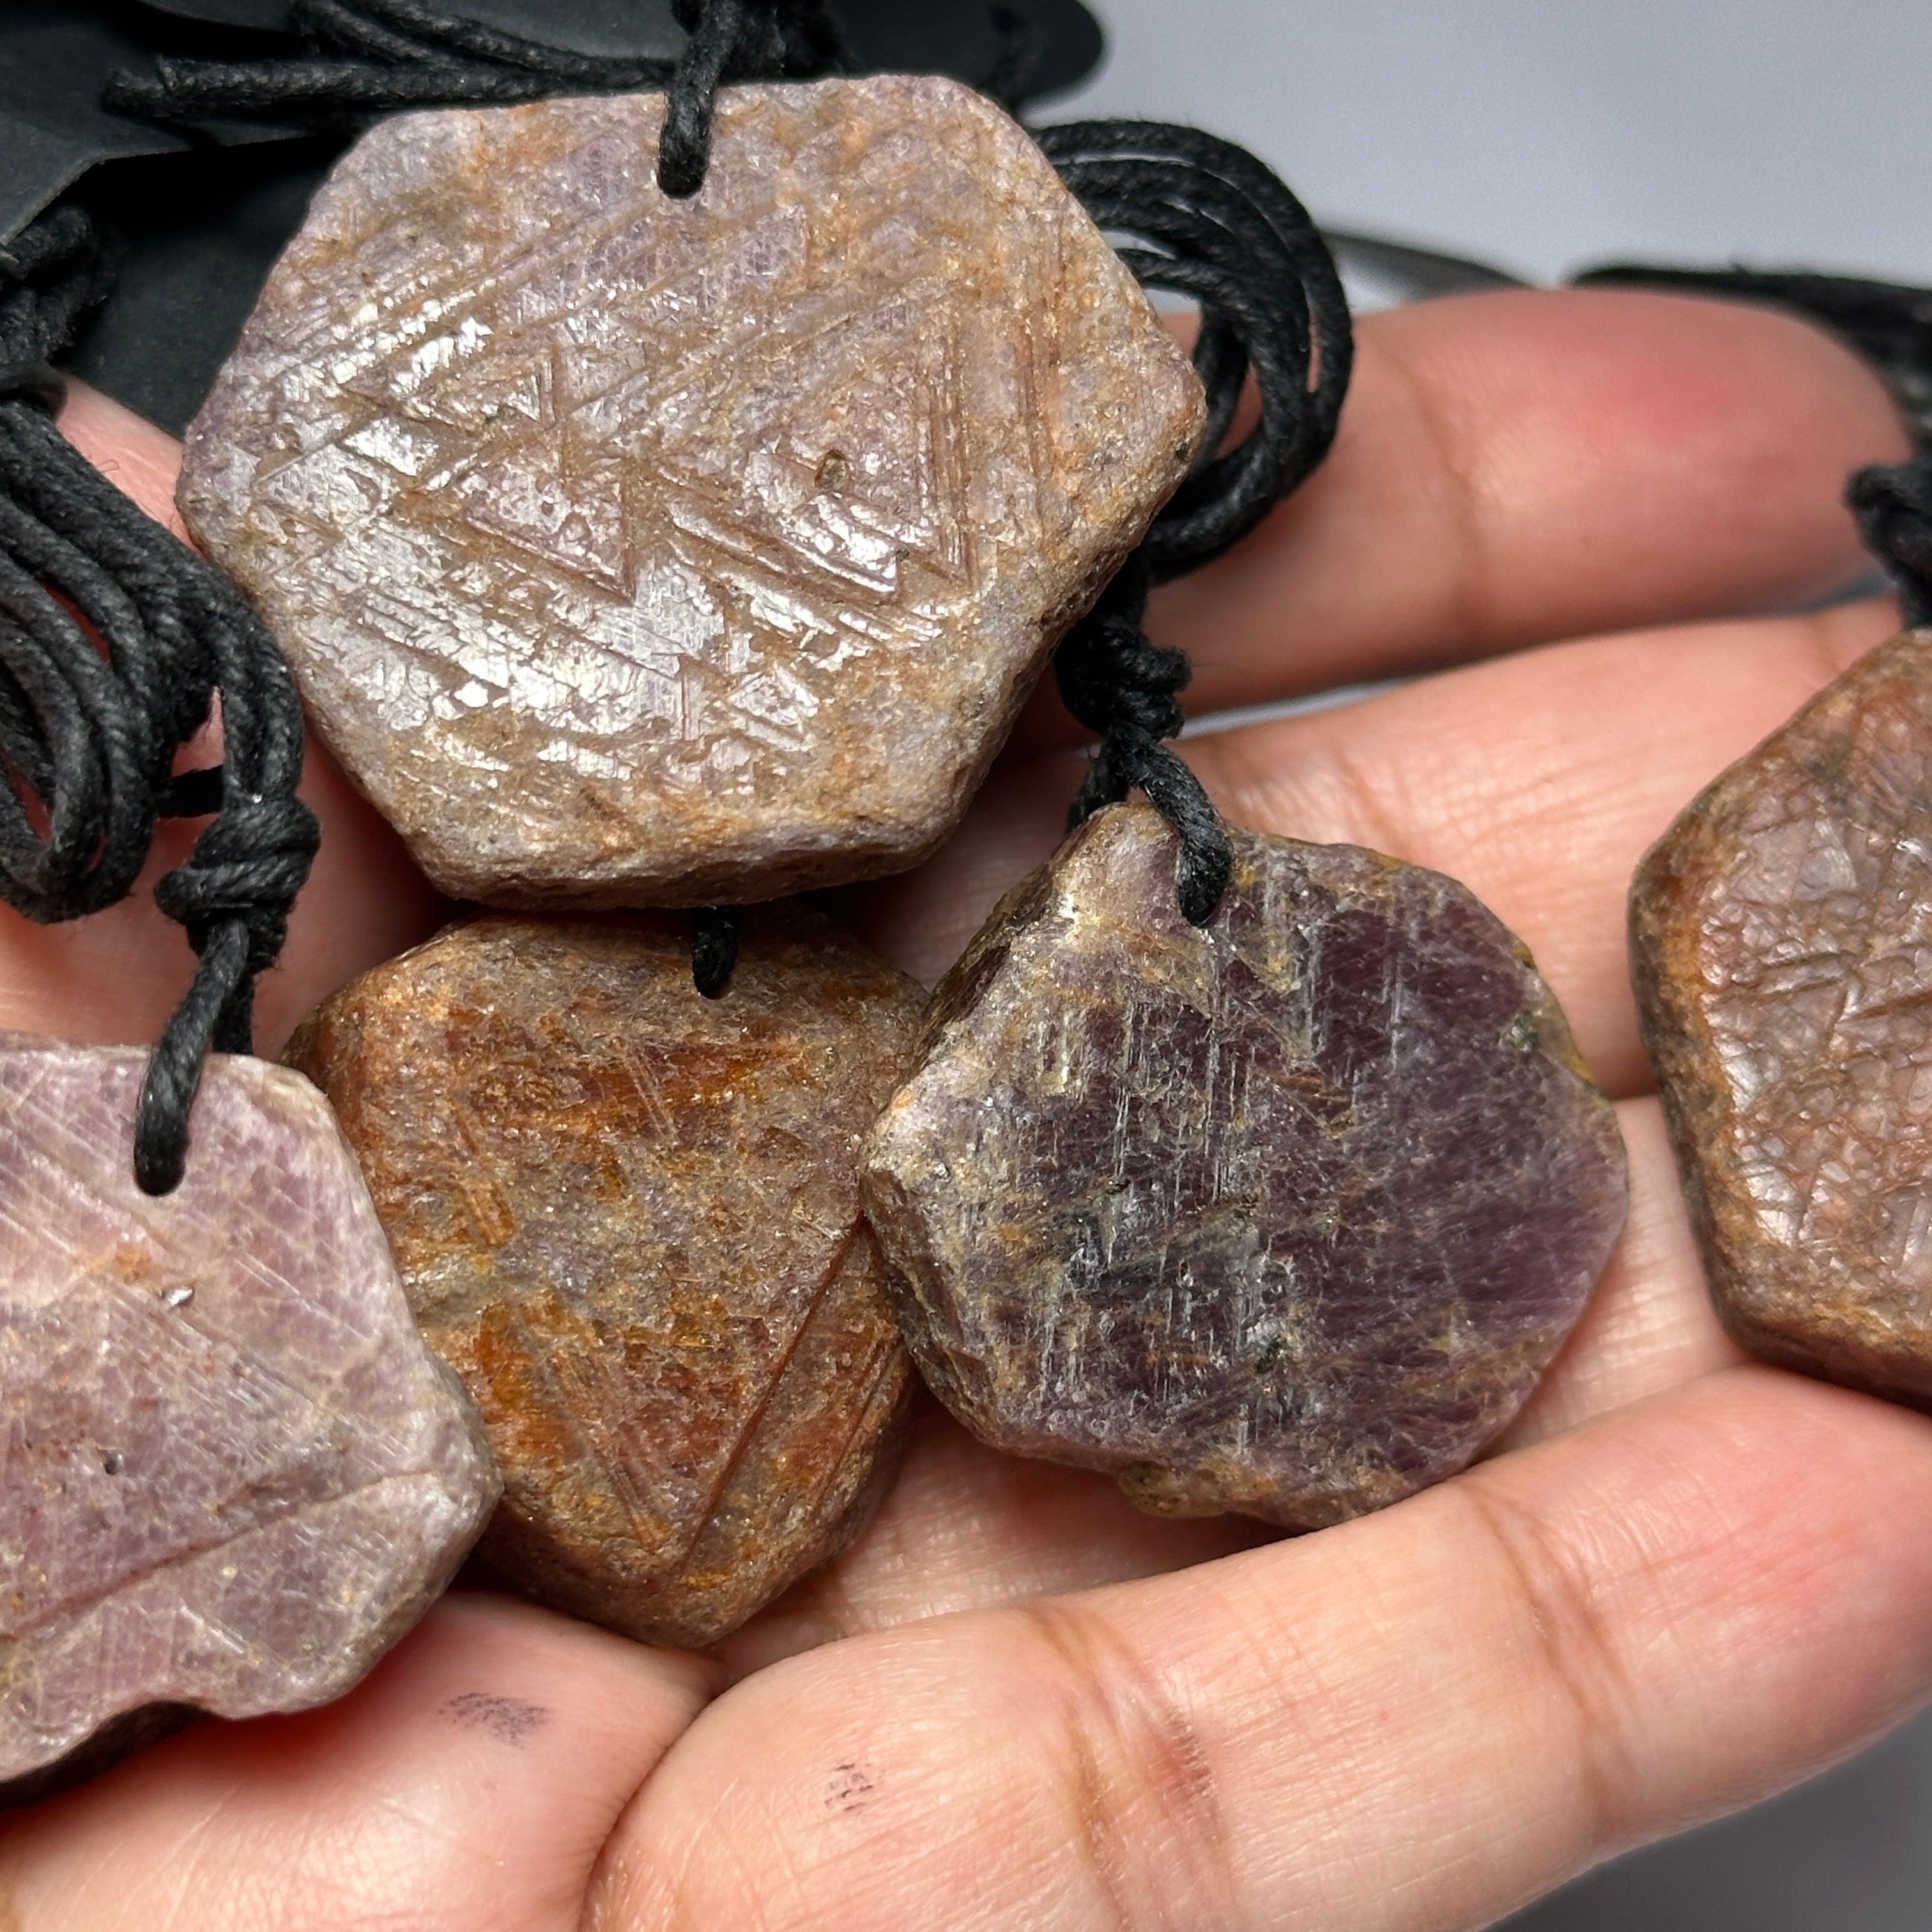 5 pcs Tanzanian Ruby / Sapphire Crystal Record Keepers pendants lot. Price is for all 5